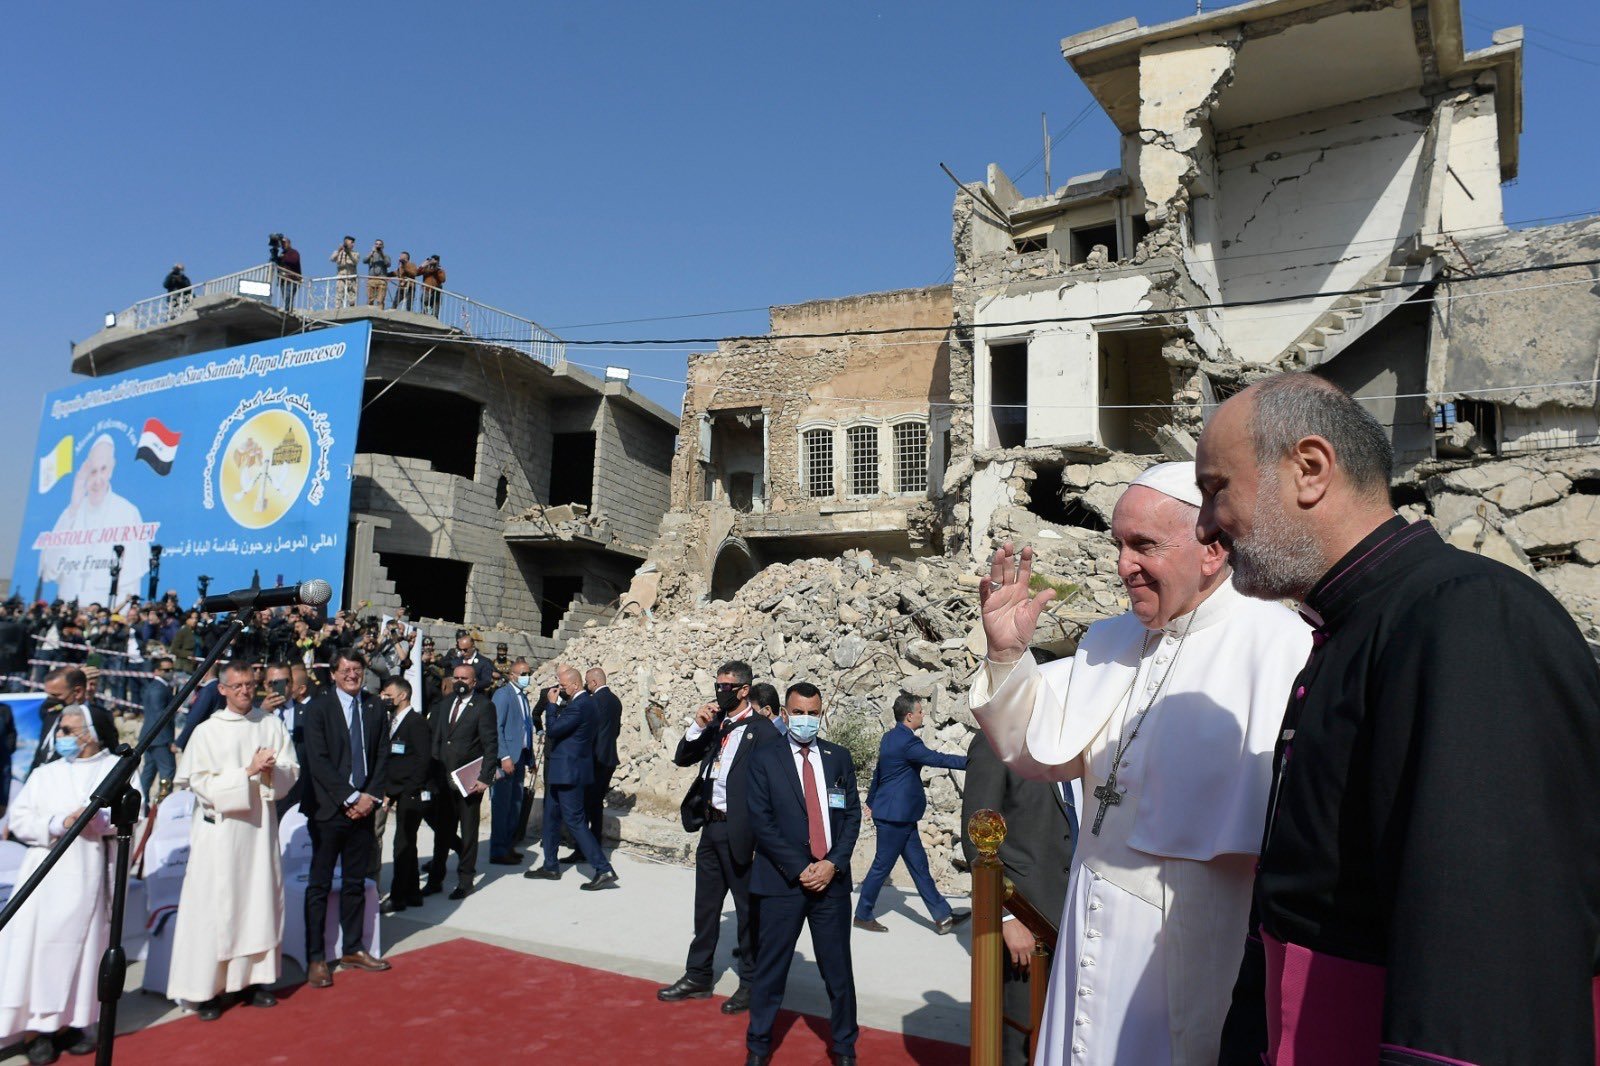 Pope Francis in Mosul, Iraq, coffee or die